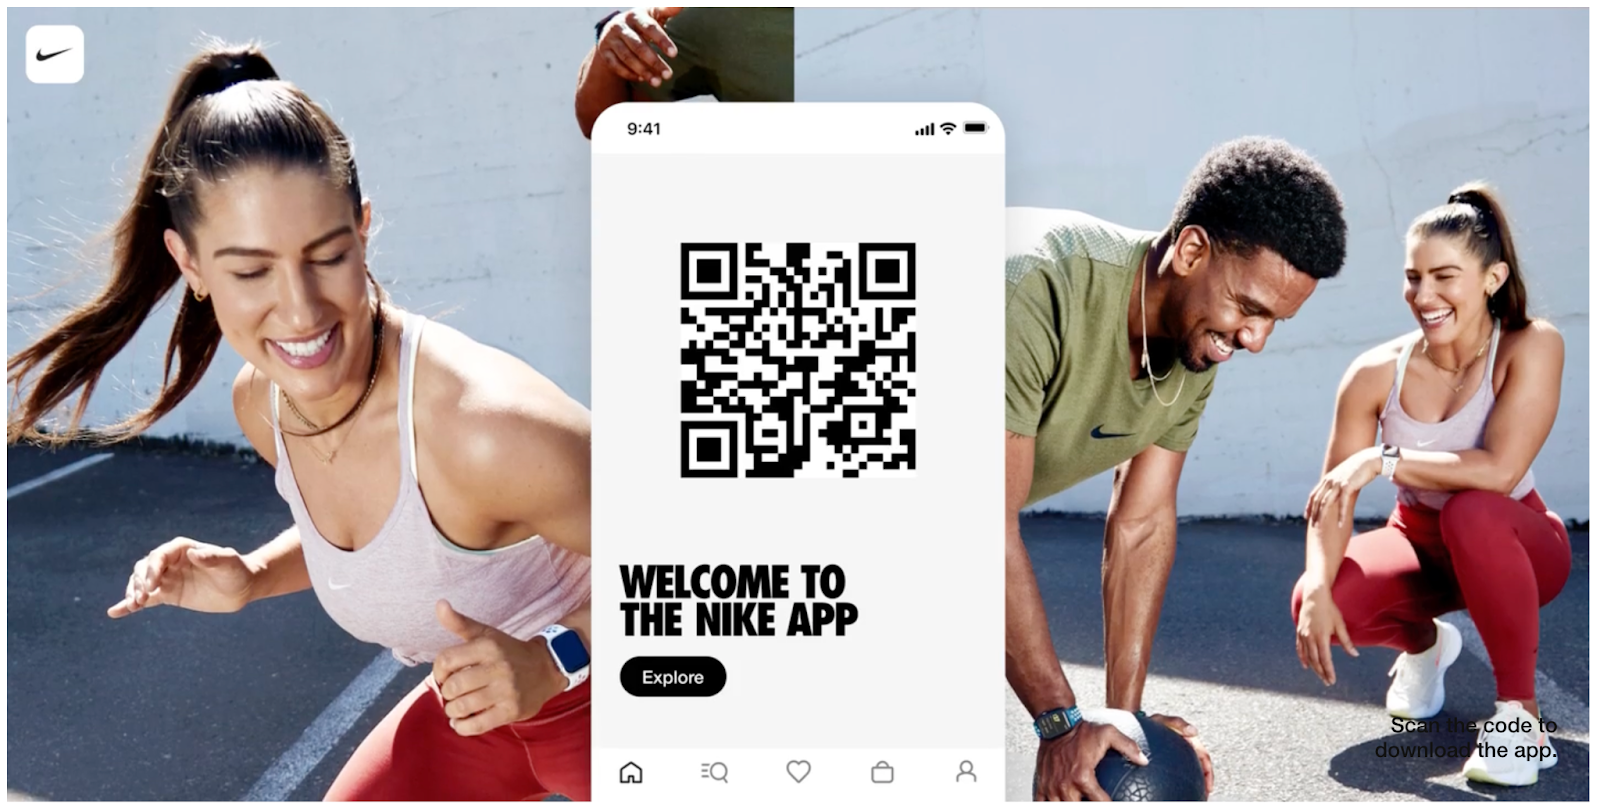 A screenshot from the Nike App explainer page with an iPhone showing a QR code linking to the Nike App, and images of 2 people wearing Nike clothing exercising in the background.